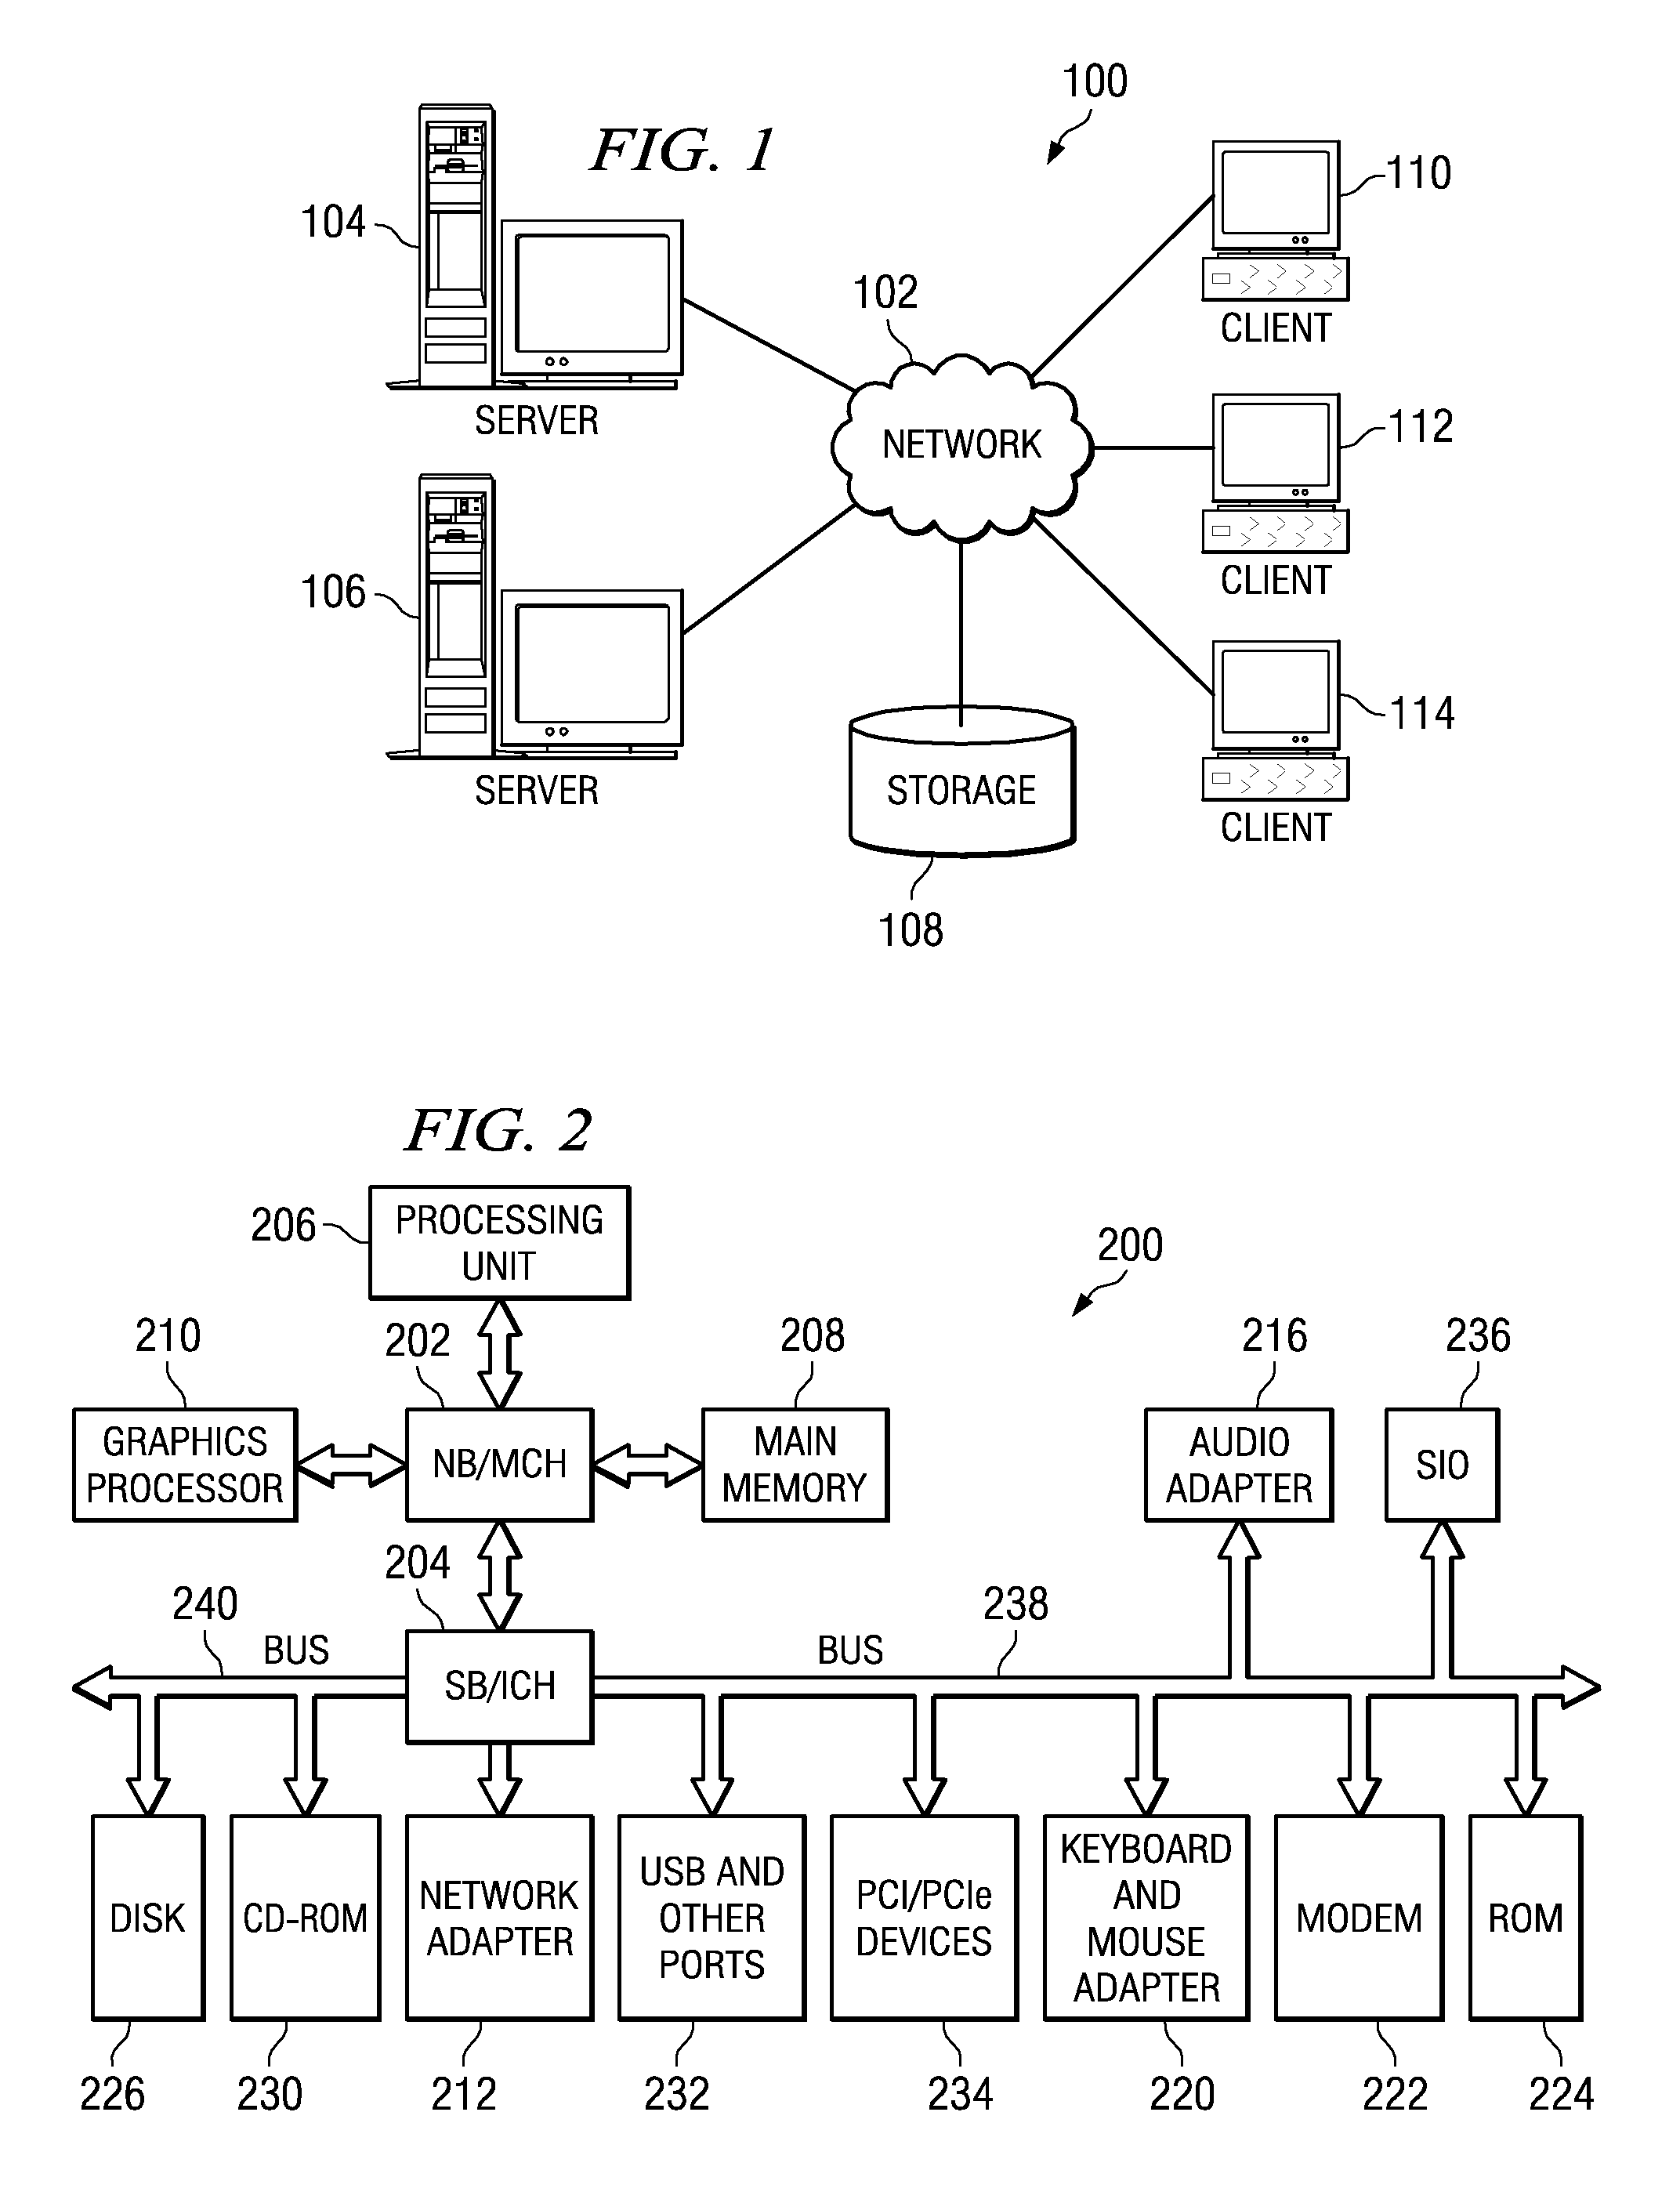 Performing collective operations using software setup and partial software execution at leaf nodes in a multi-tiered full-graph interconnect architecture